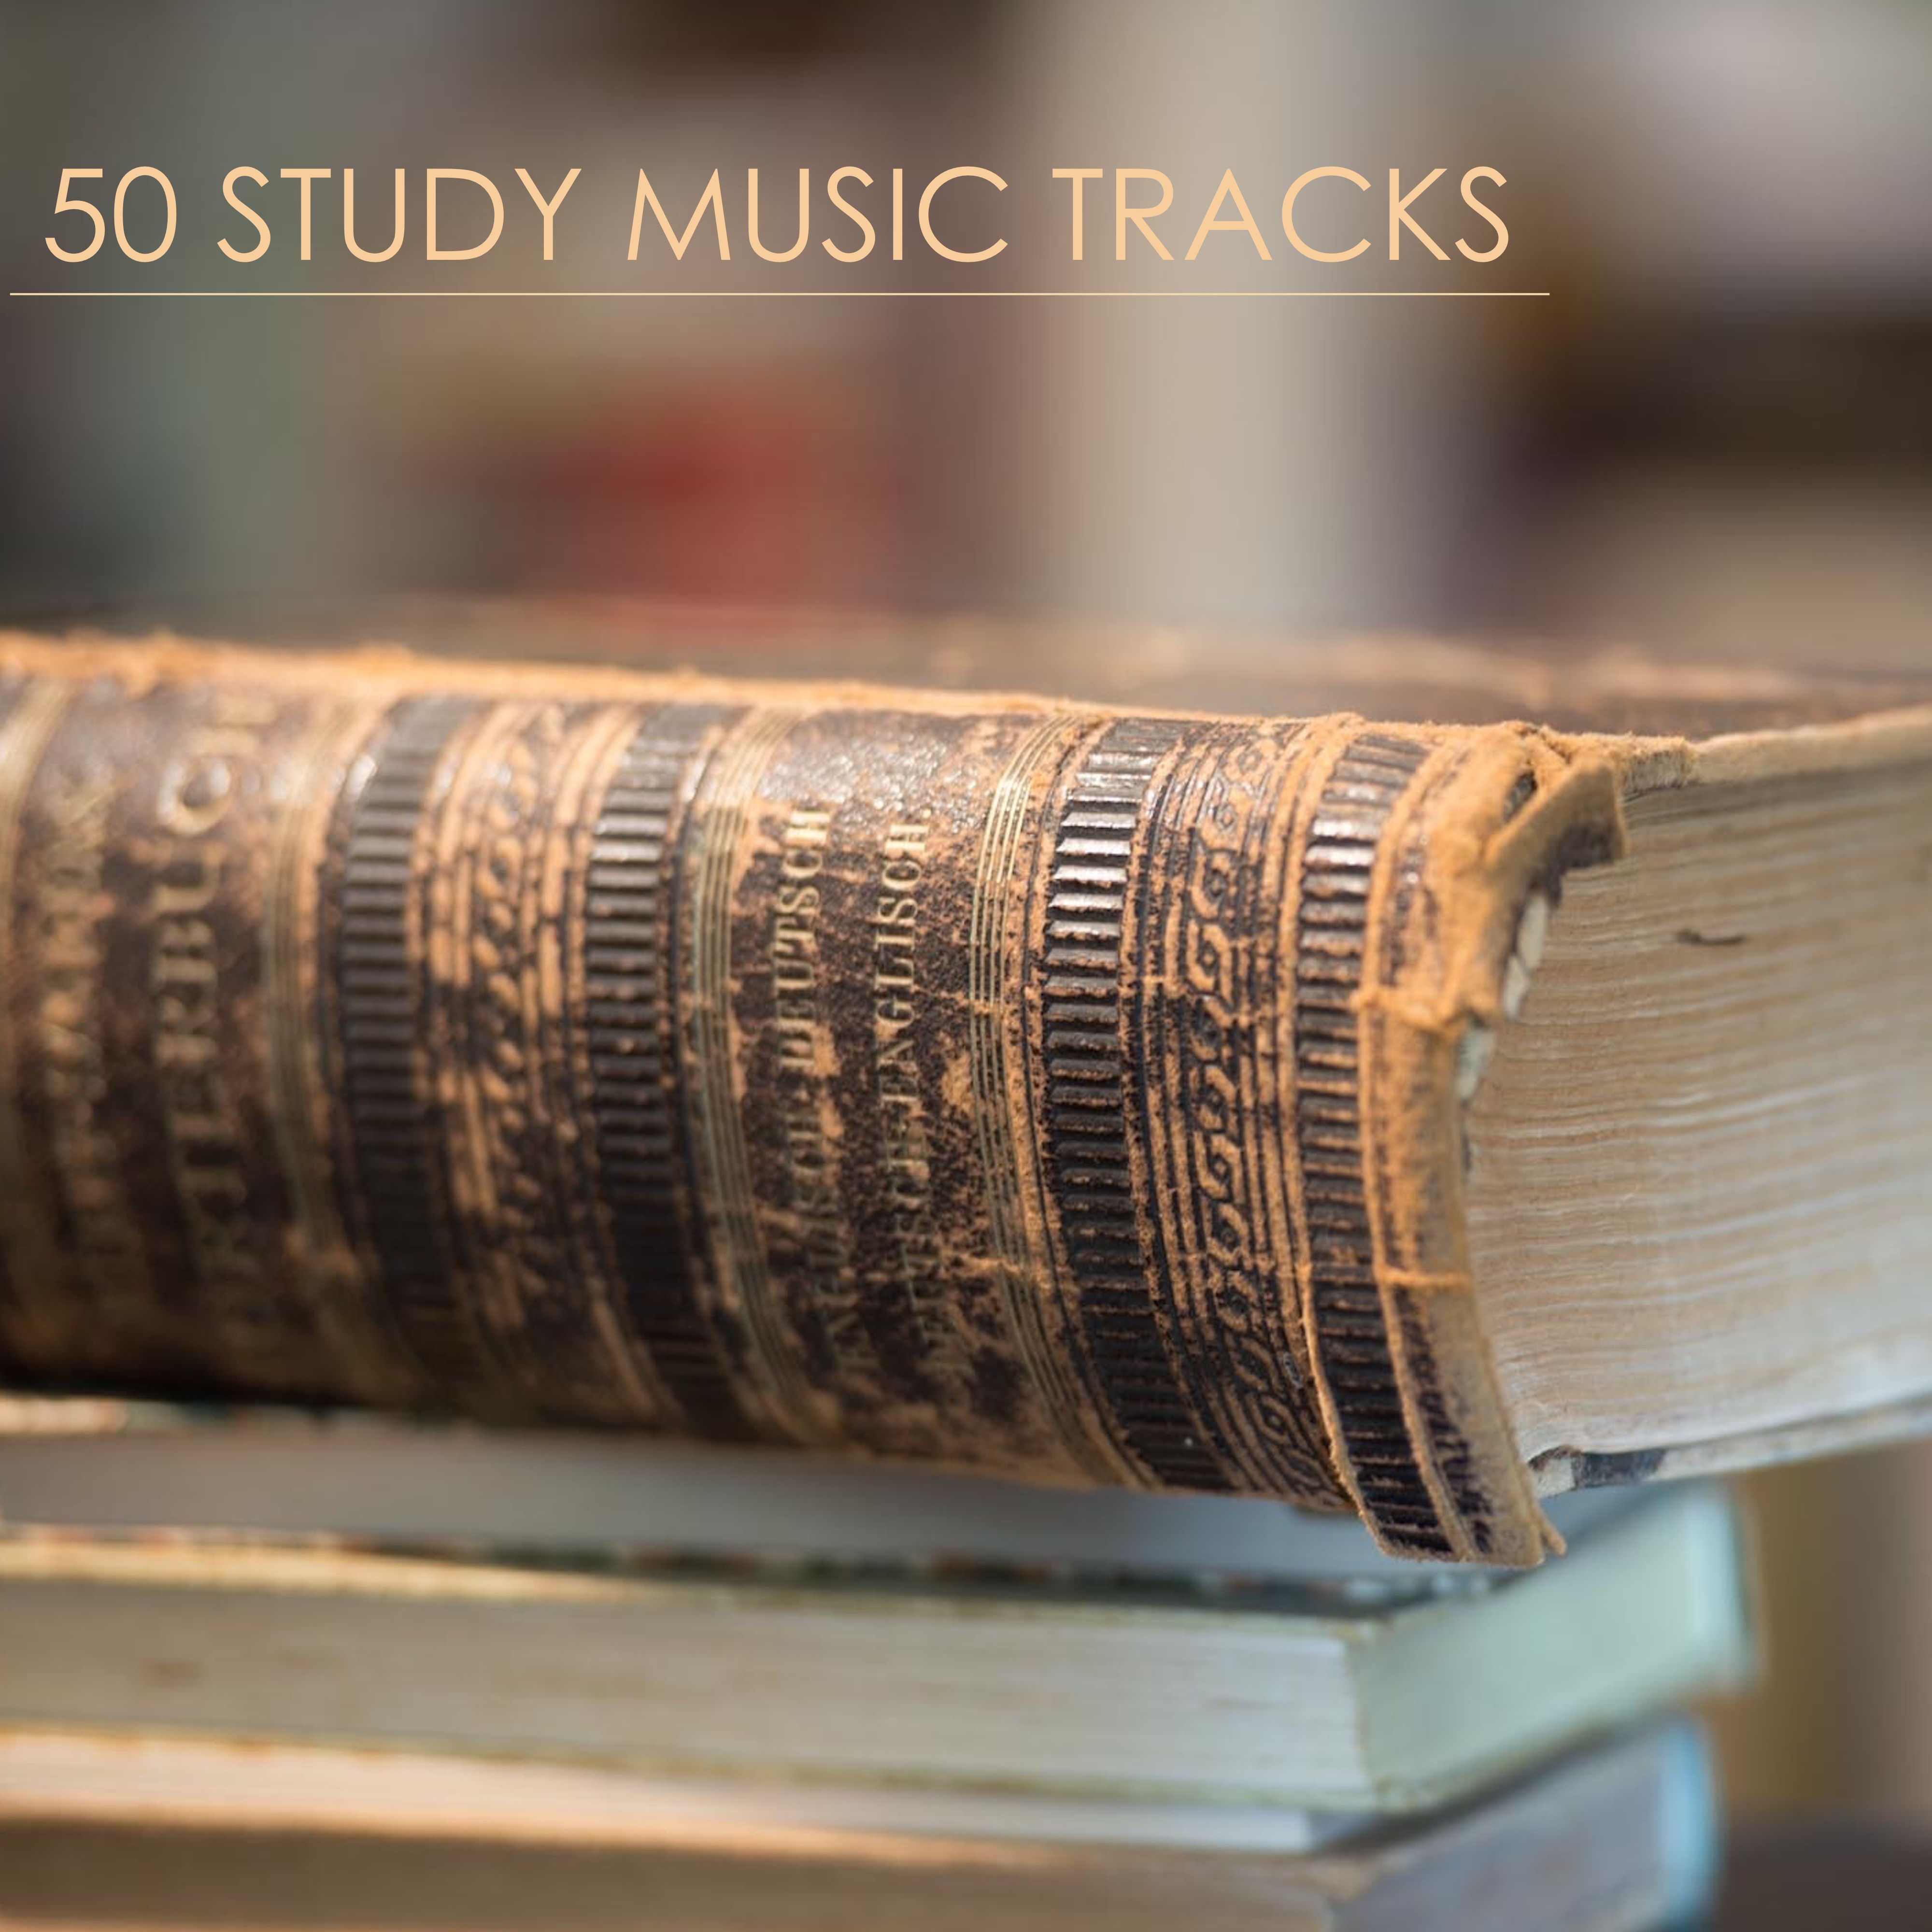 50 Study Music Tracks - Studying Music for Concentration to Increase Brain Power & Exam Study Learning